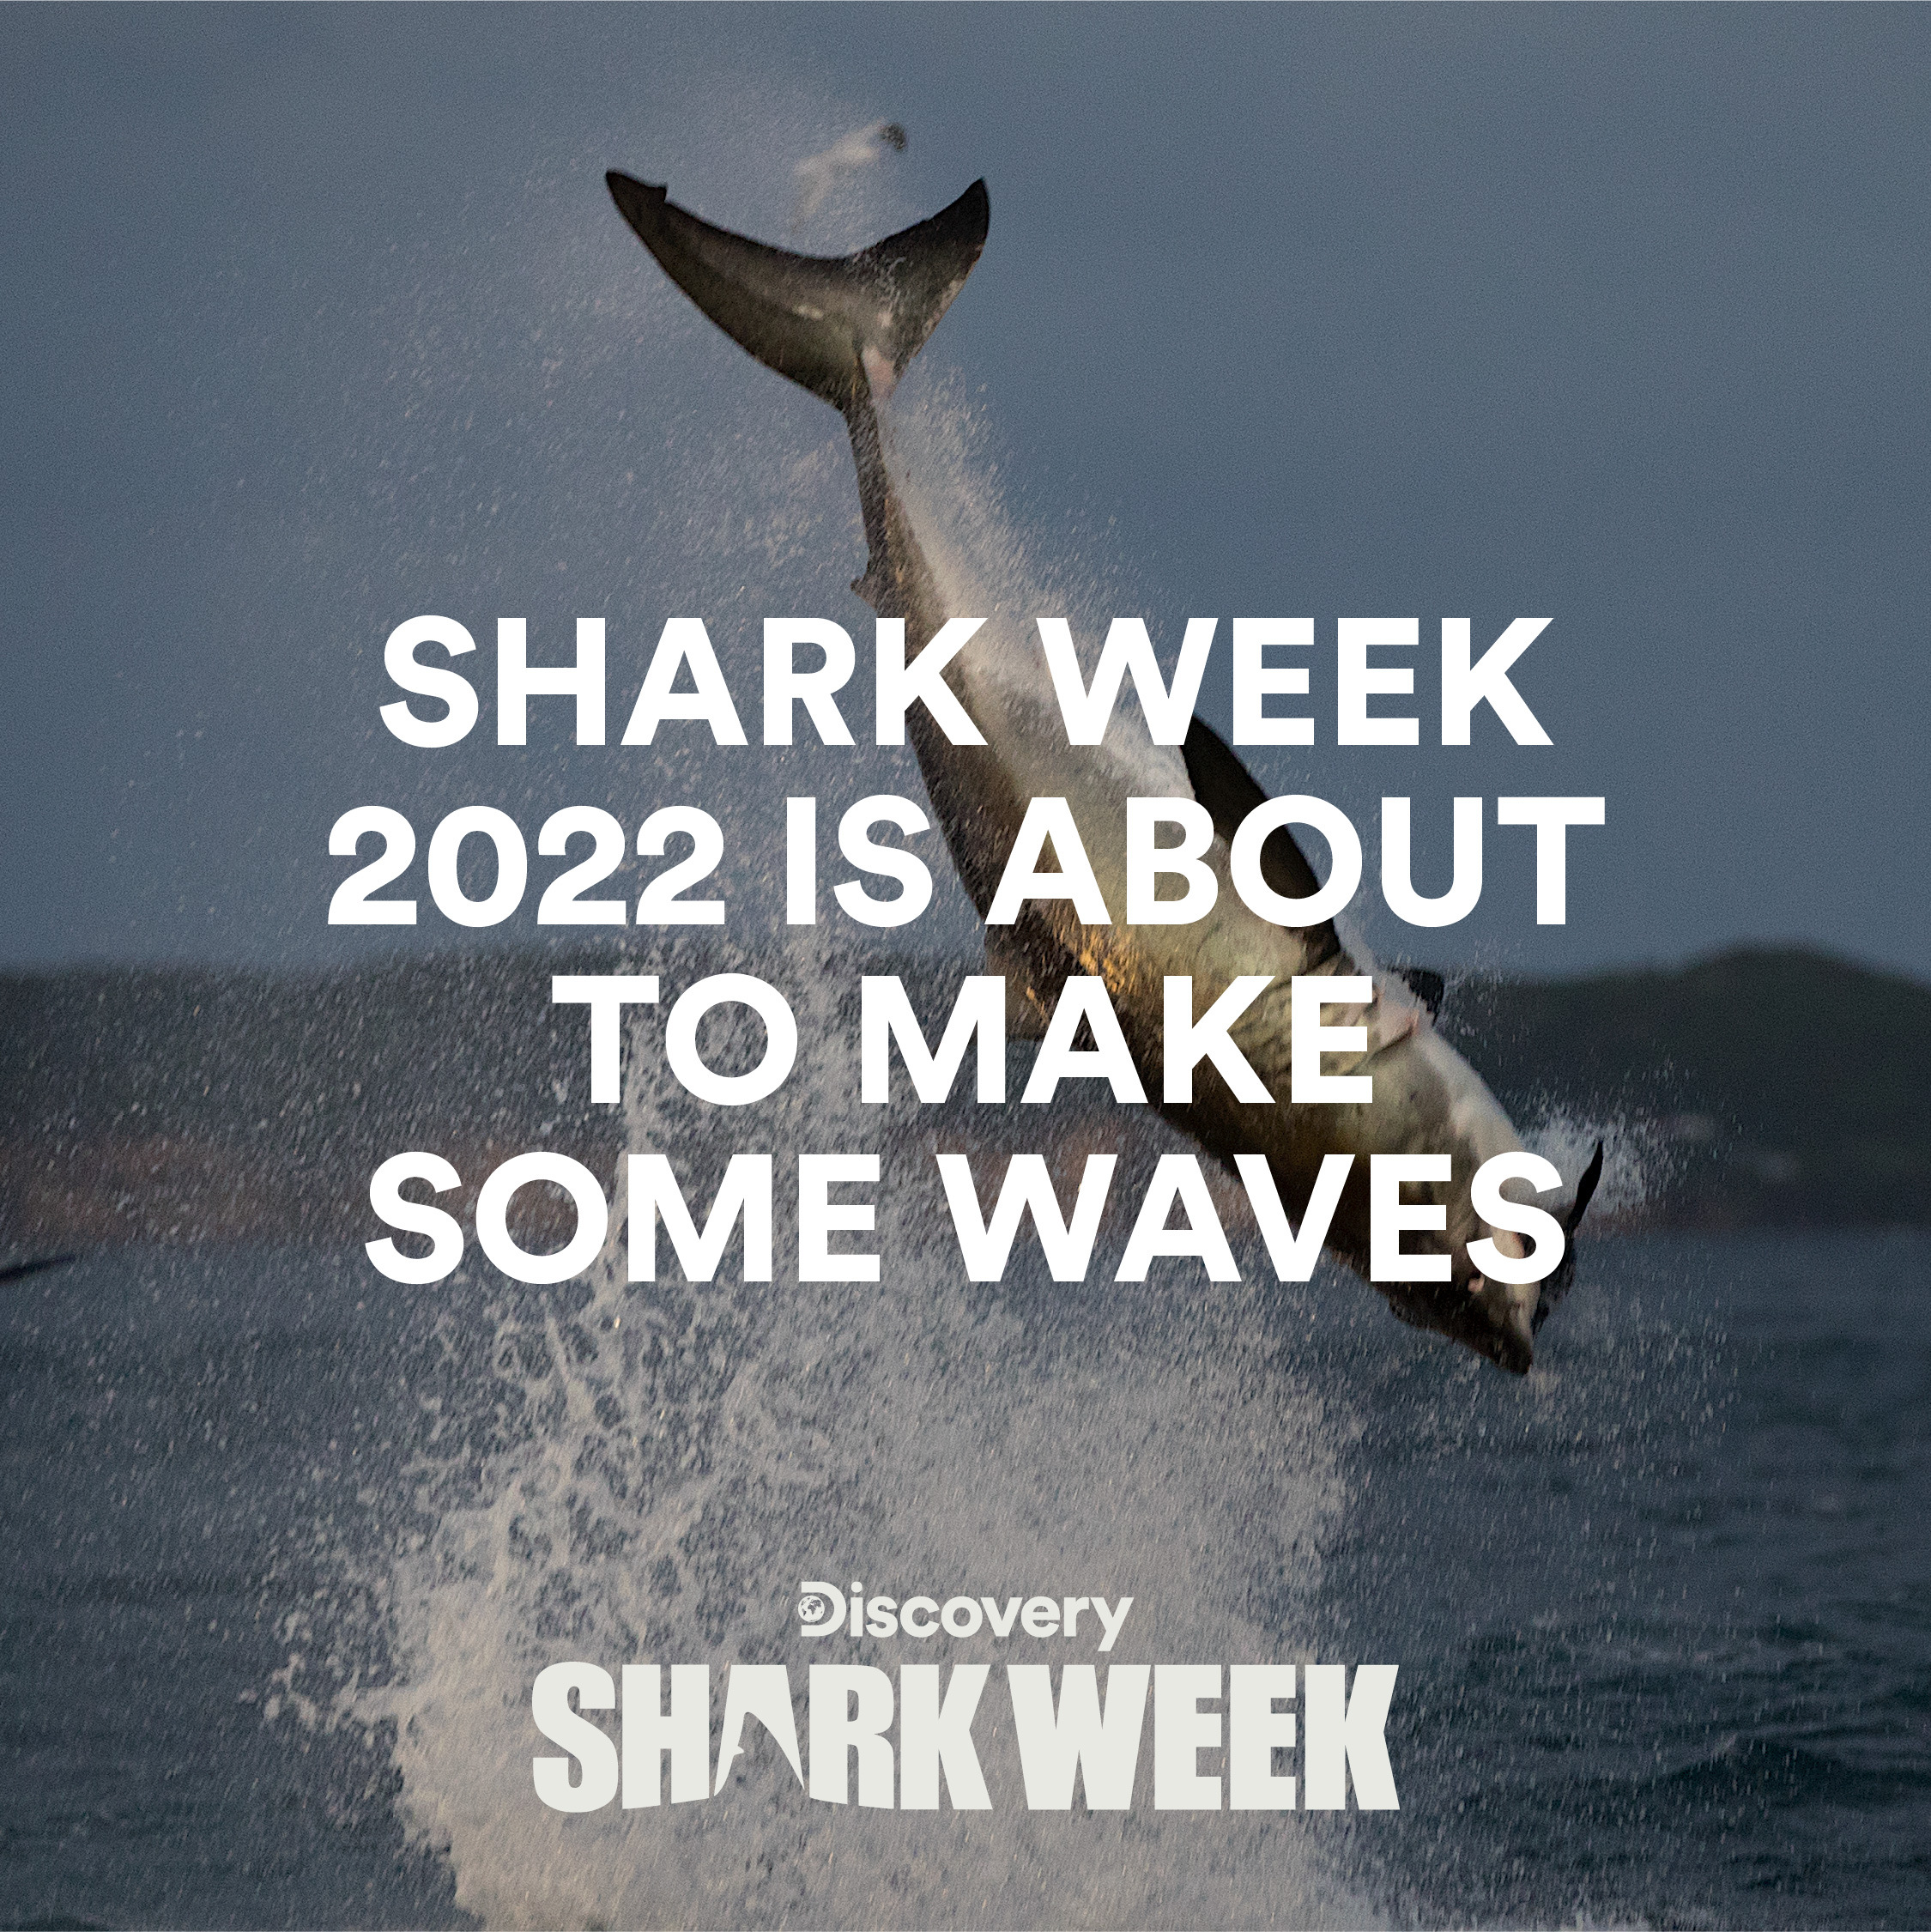 Shark Week 2022 is About to Make Some Waves